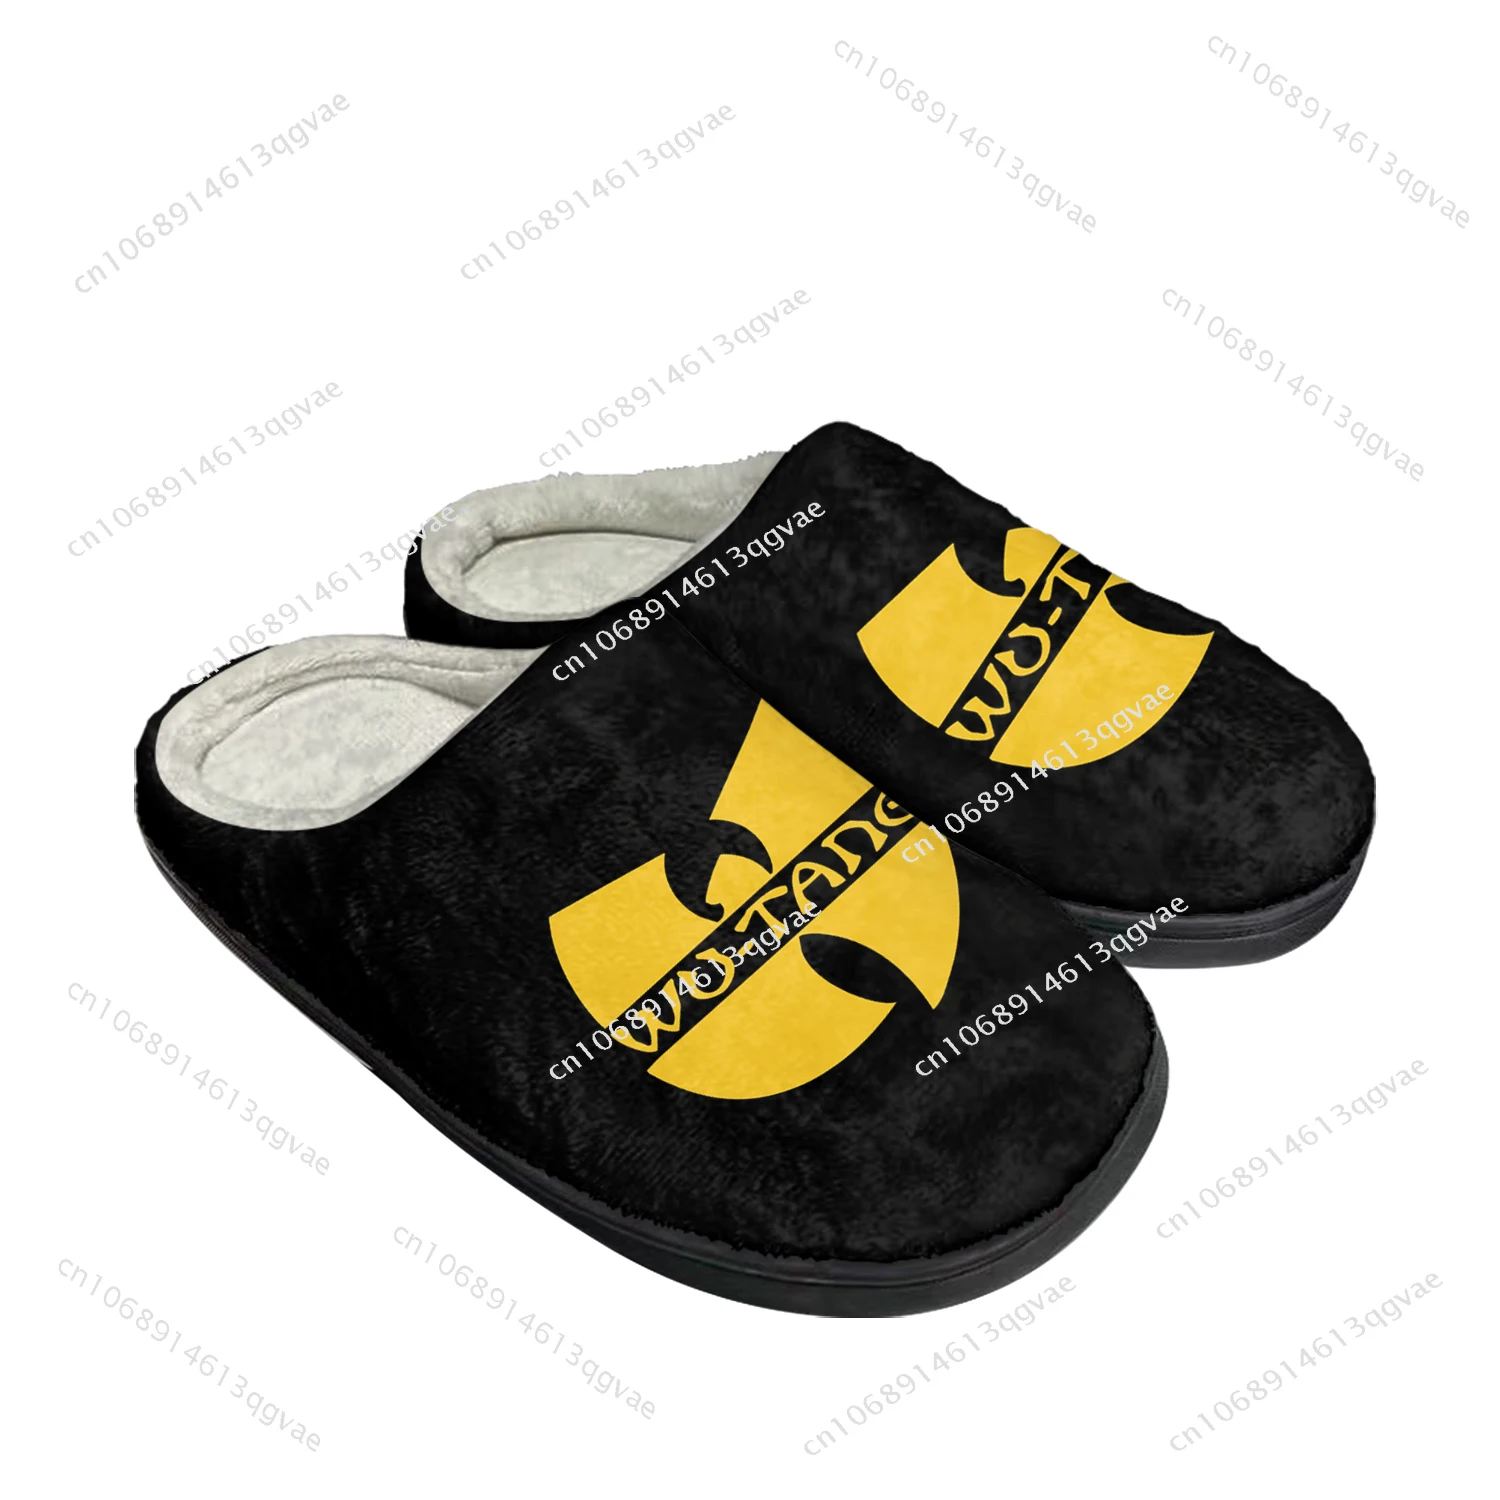 

Wu-T-Tang Clan Home Cotton Slippers Mens Womens Plush Bedroom Casual Keep Warm Shoes Thermal Indoor Slipper Custom Made Shoe